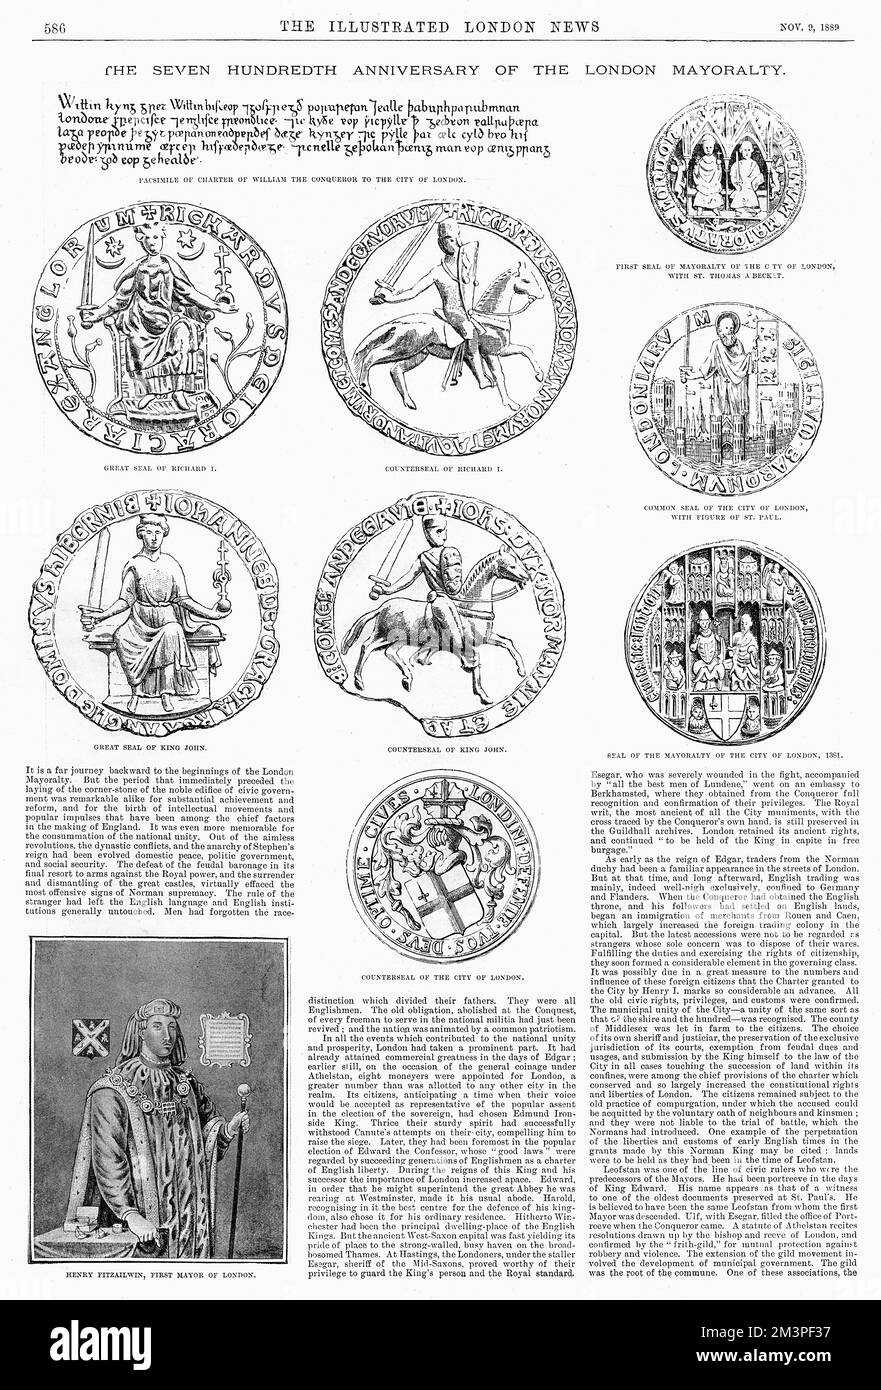 In honour of the 700th anniversary of the London Mayoralty, a page dedicated to the various seals of the City of London including the first seal of the Mayoralty of the City of London with St. Thomas A. Beckett; the common seal of the City of London with the figure of St. Paul; and the great seals of King Richard I and King John. Also documented is a facsimile of the charter of William the Conqueror to the City of London and a portrait of Henry Fitzailwin, the first Mayor of London.     Date: 1889 Stock Photo